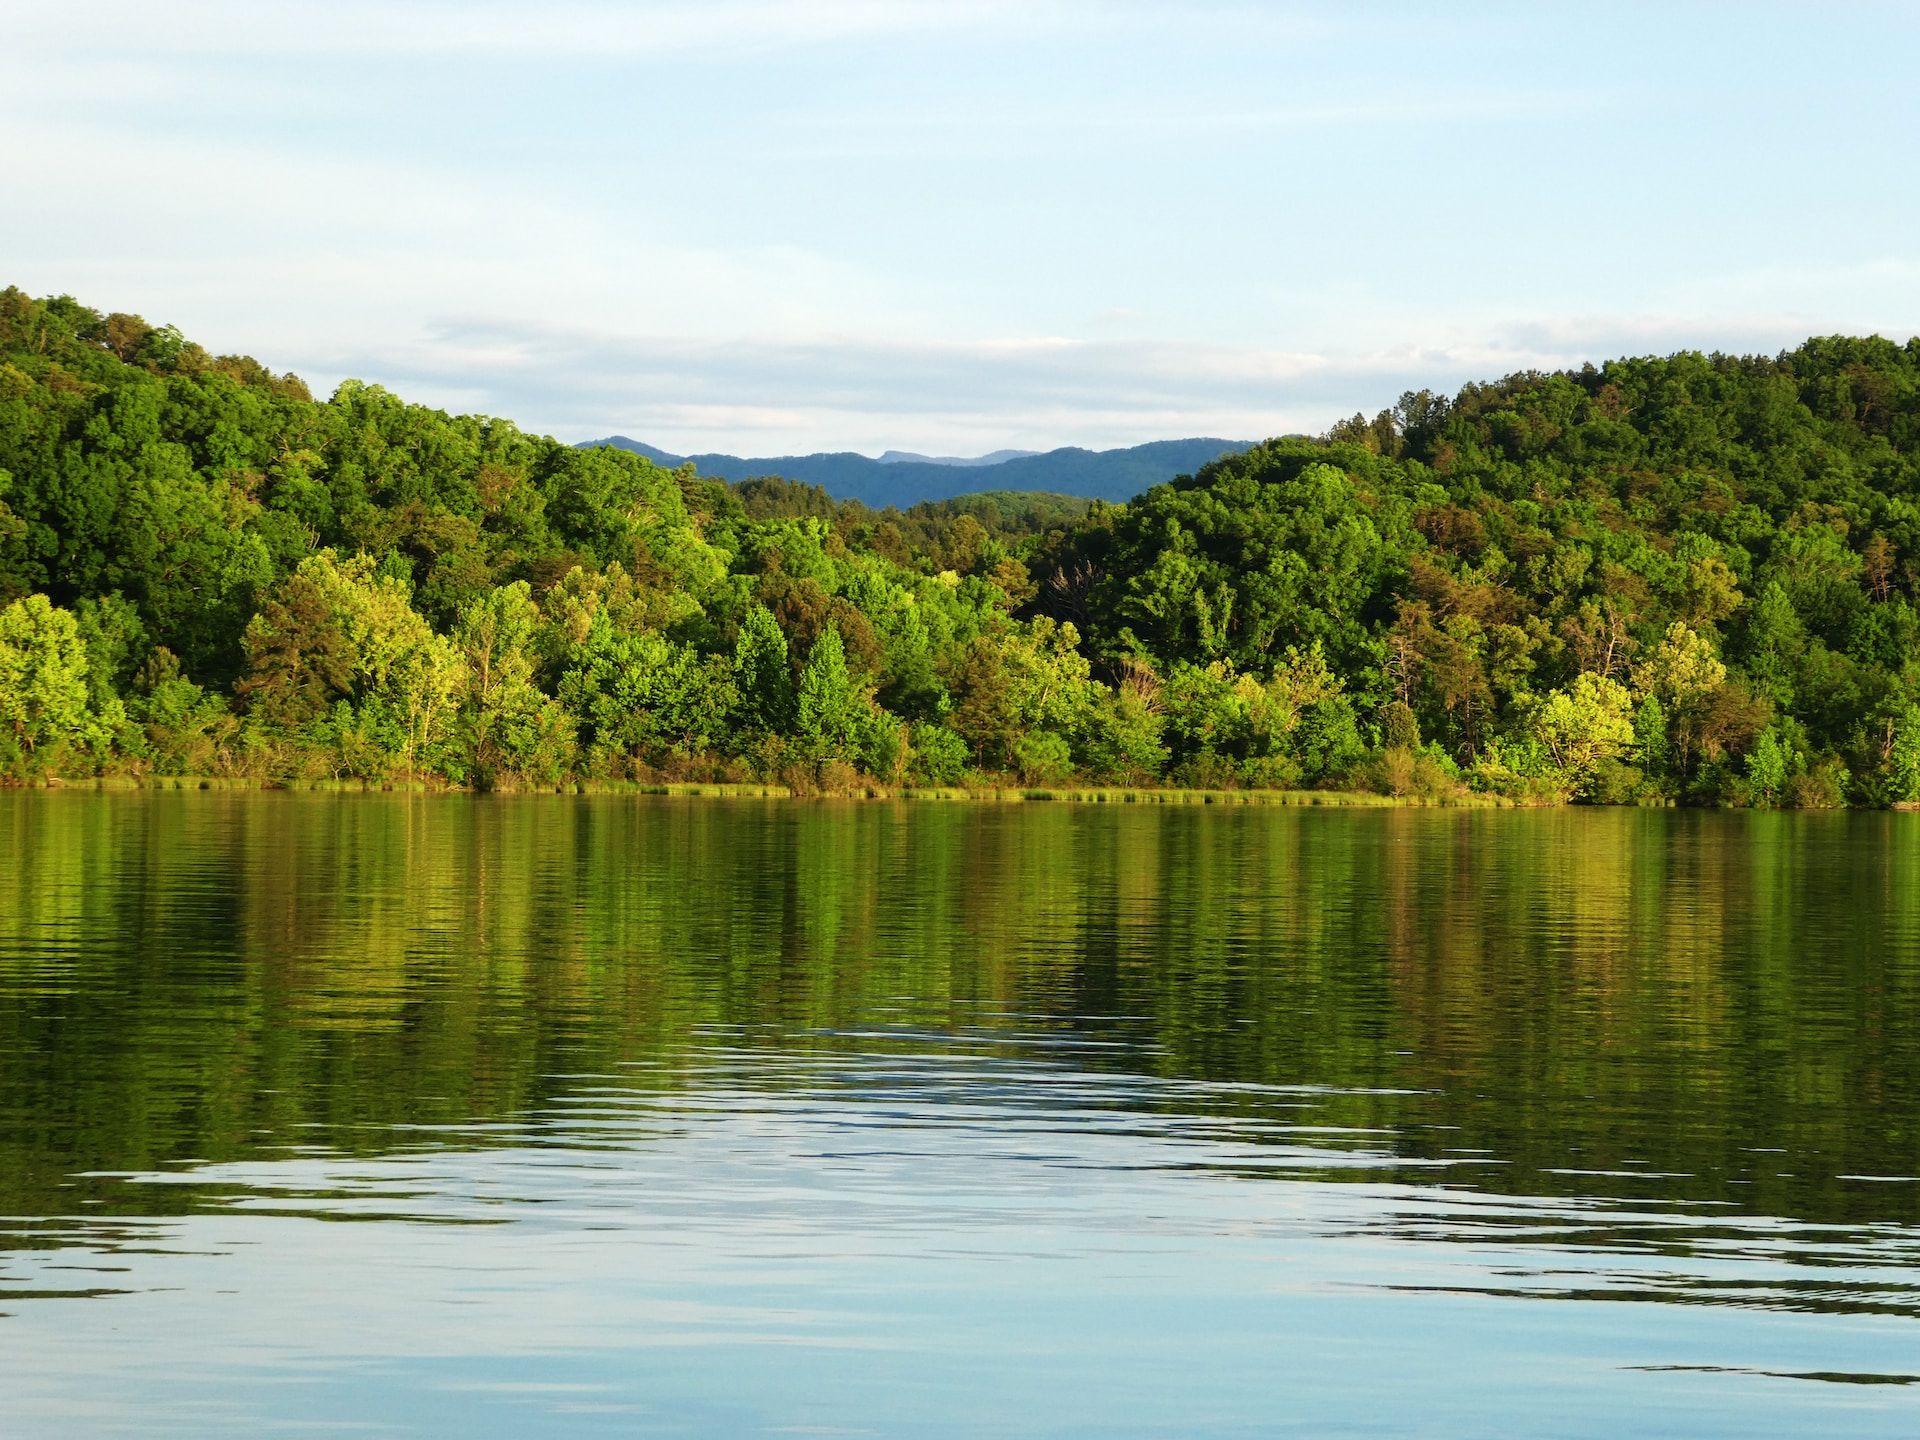 Tellico Lake surrounded by trees and mountains